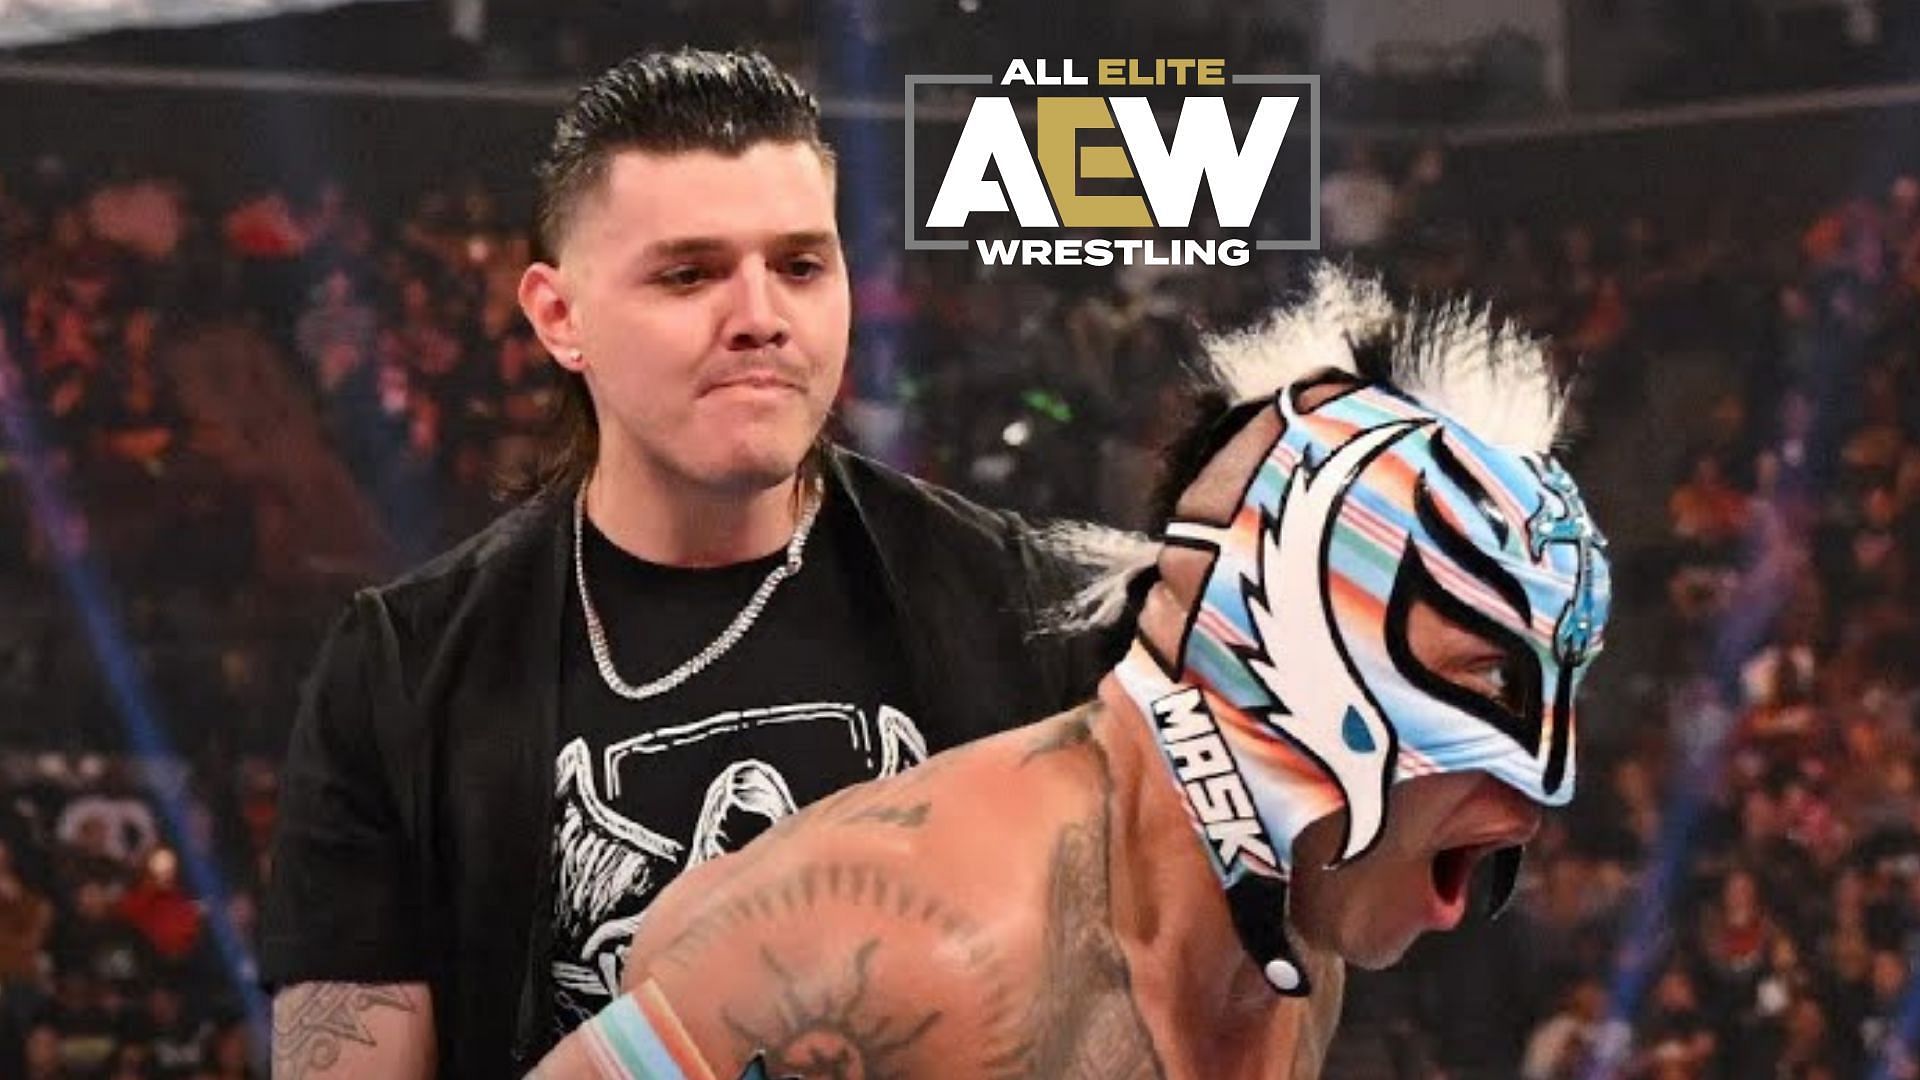 If Dominik retires Rey Mysterio at WrestleMania 39, he should be confronted by AEW star someday